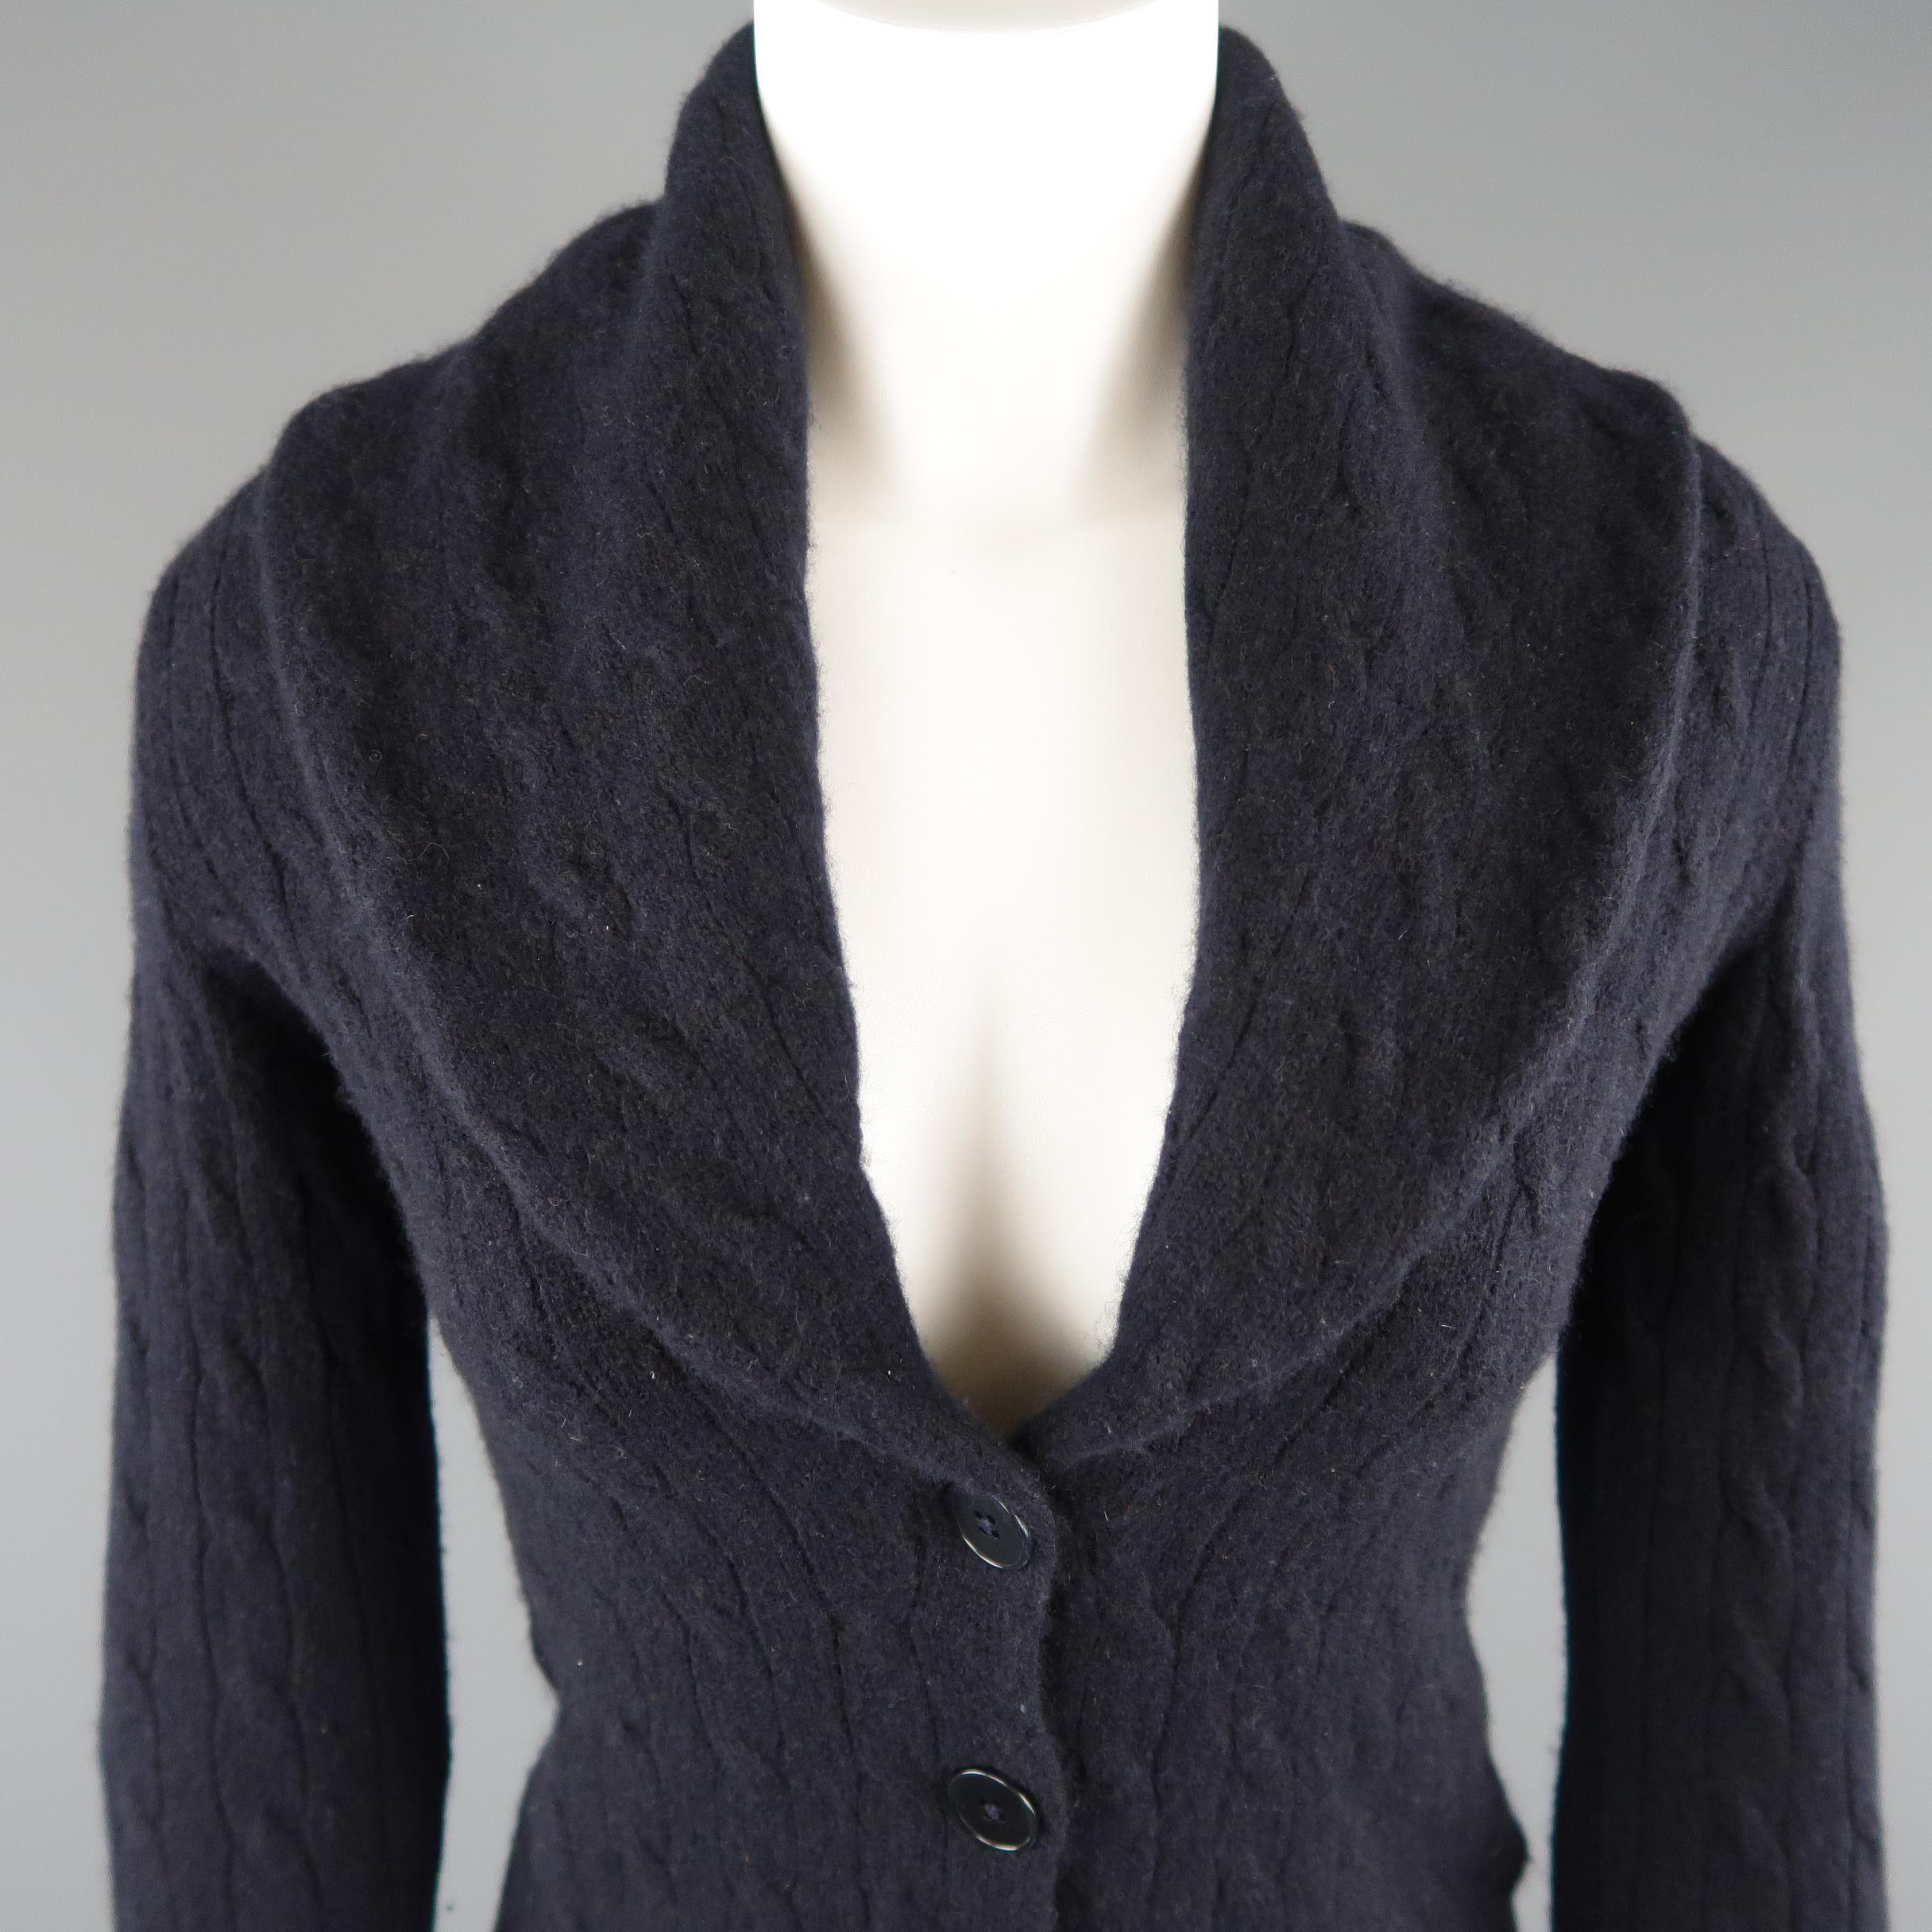 RALPH LAUREN BLACK LABEL cardigan comes in navy cashmere blend cable knit with a wide shawl collar, cropped hem, and four button front.
 
Excellent Pre-Owned Condition.
Marked: S
 
Measurements:
 
Shoulder: 16 in.
Bust: 38 in.
Sleeve: 23.5